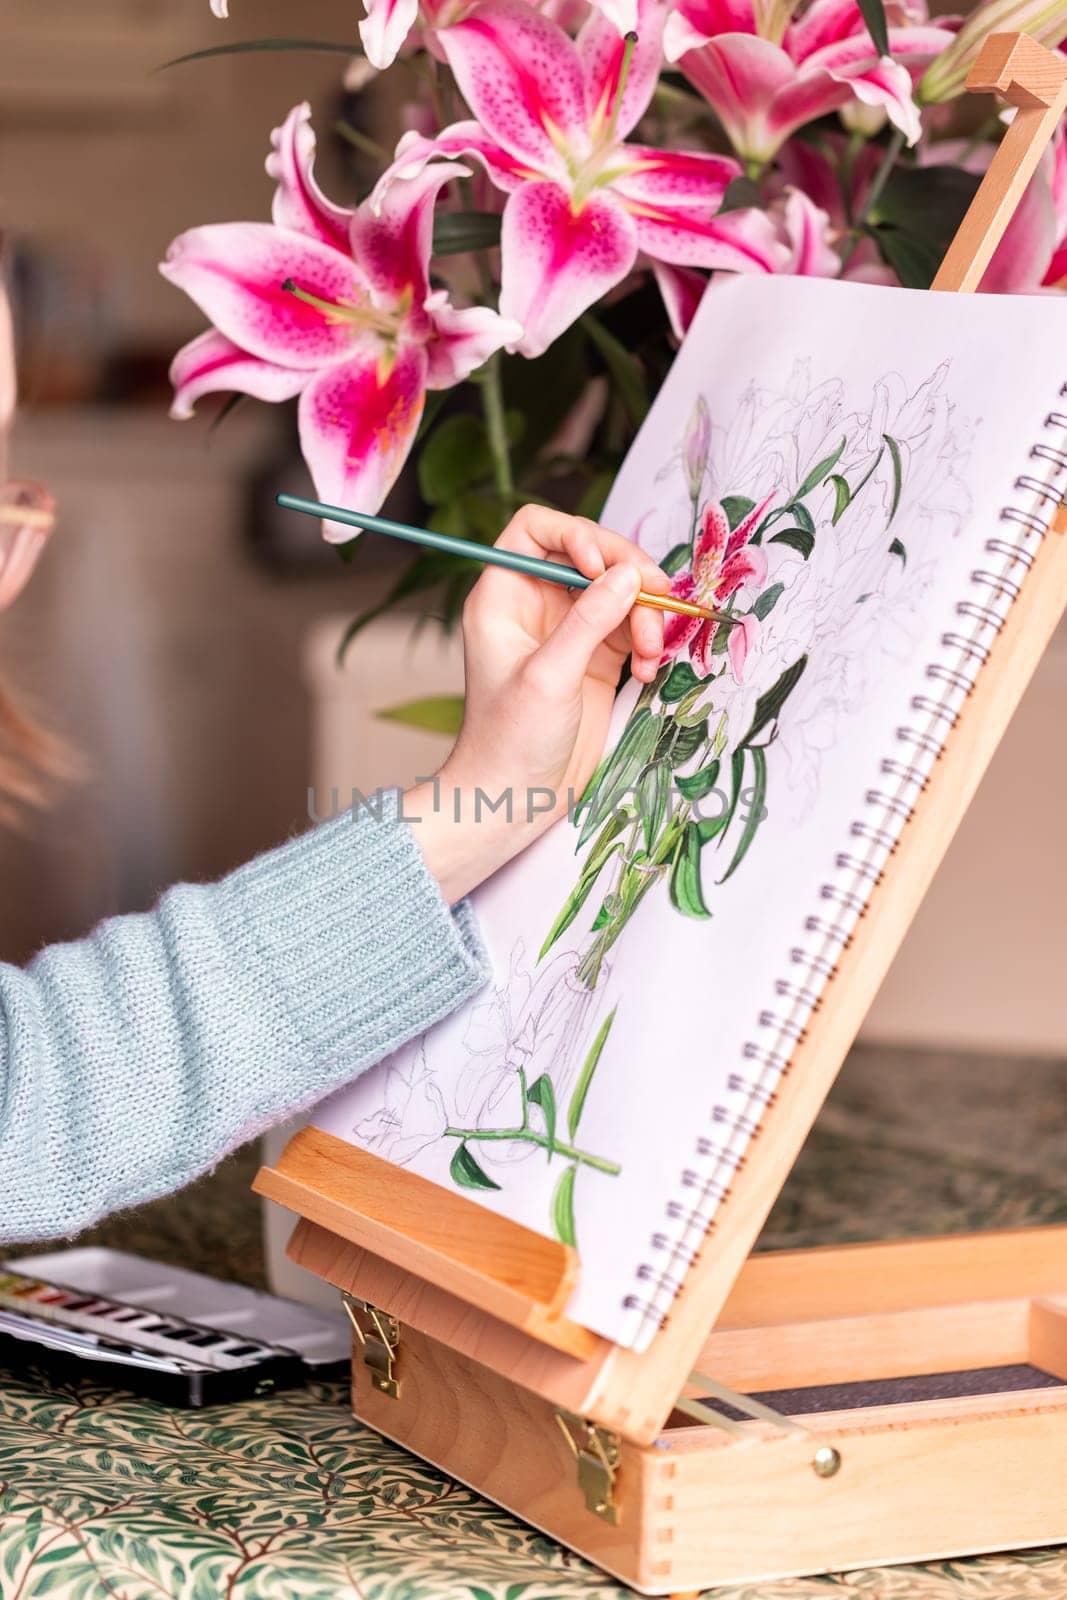 Young left-handed girl painting still life with flowers, purple lilies, with watercolor paints on the easel by Len44ik